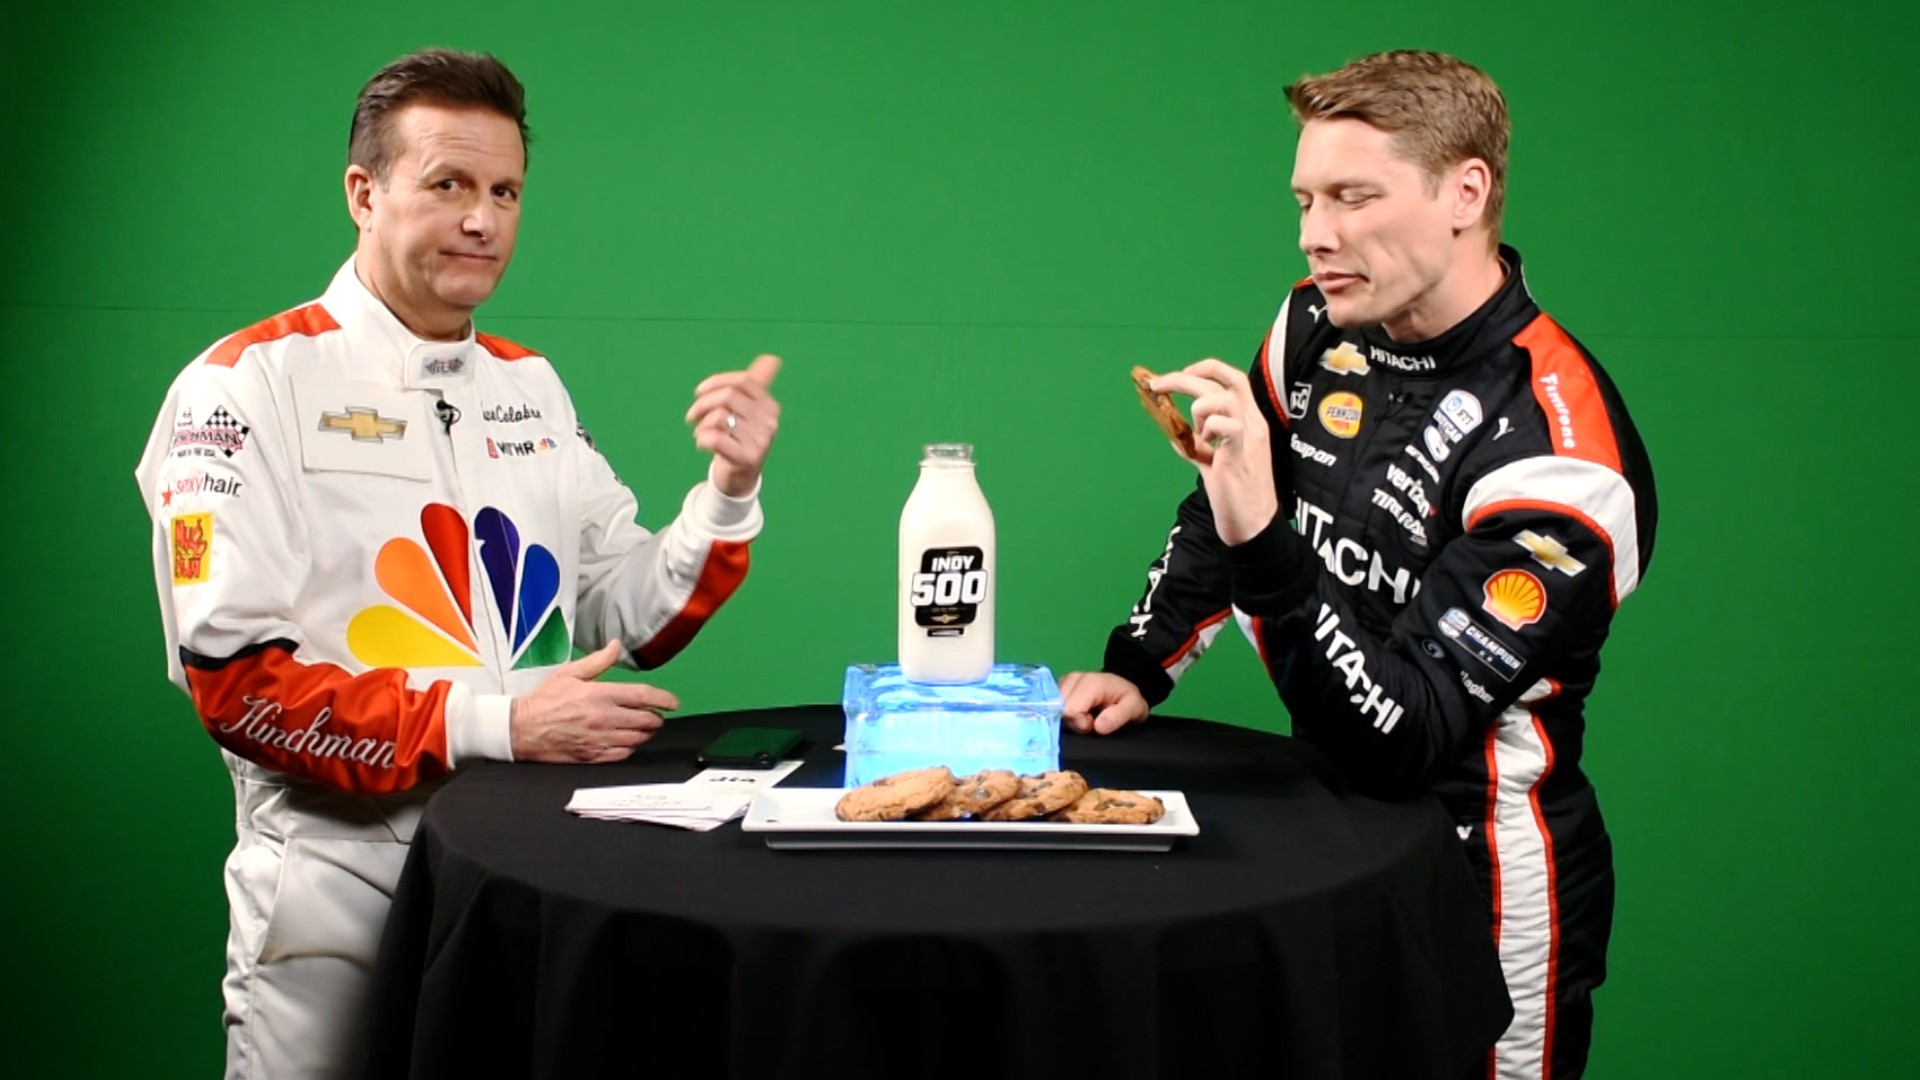 The IndyCar drivers don't hold back as they talk with Dave Calabro over Milk & Cookies.